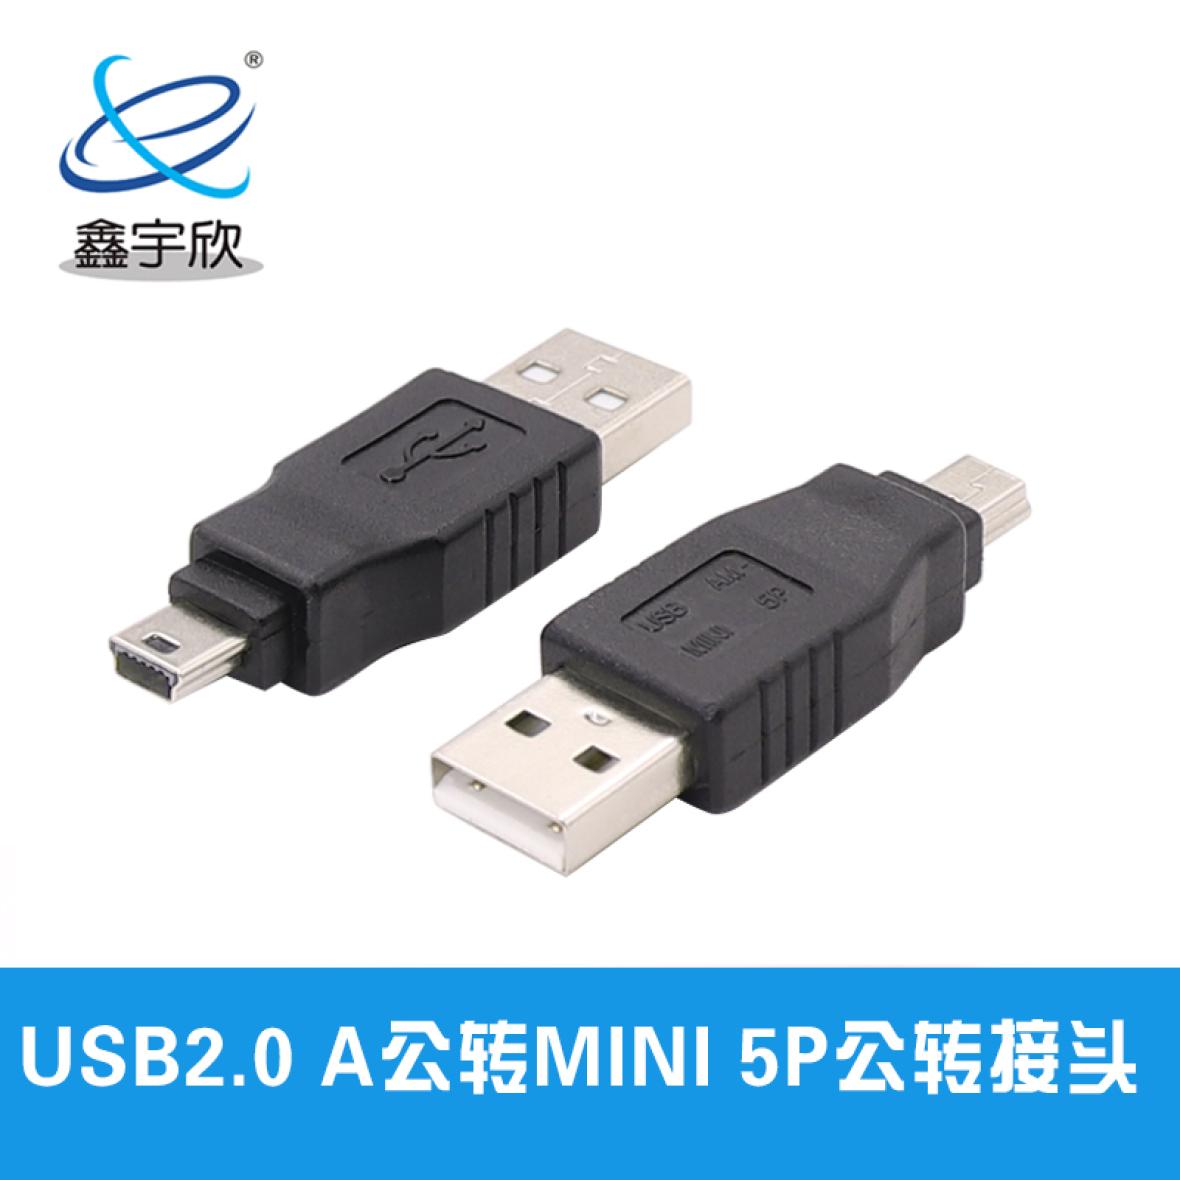  USB2.0A male to mini5p male adapter